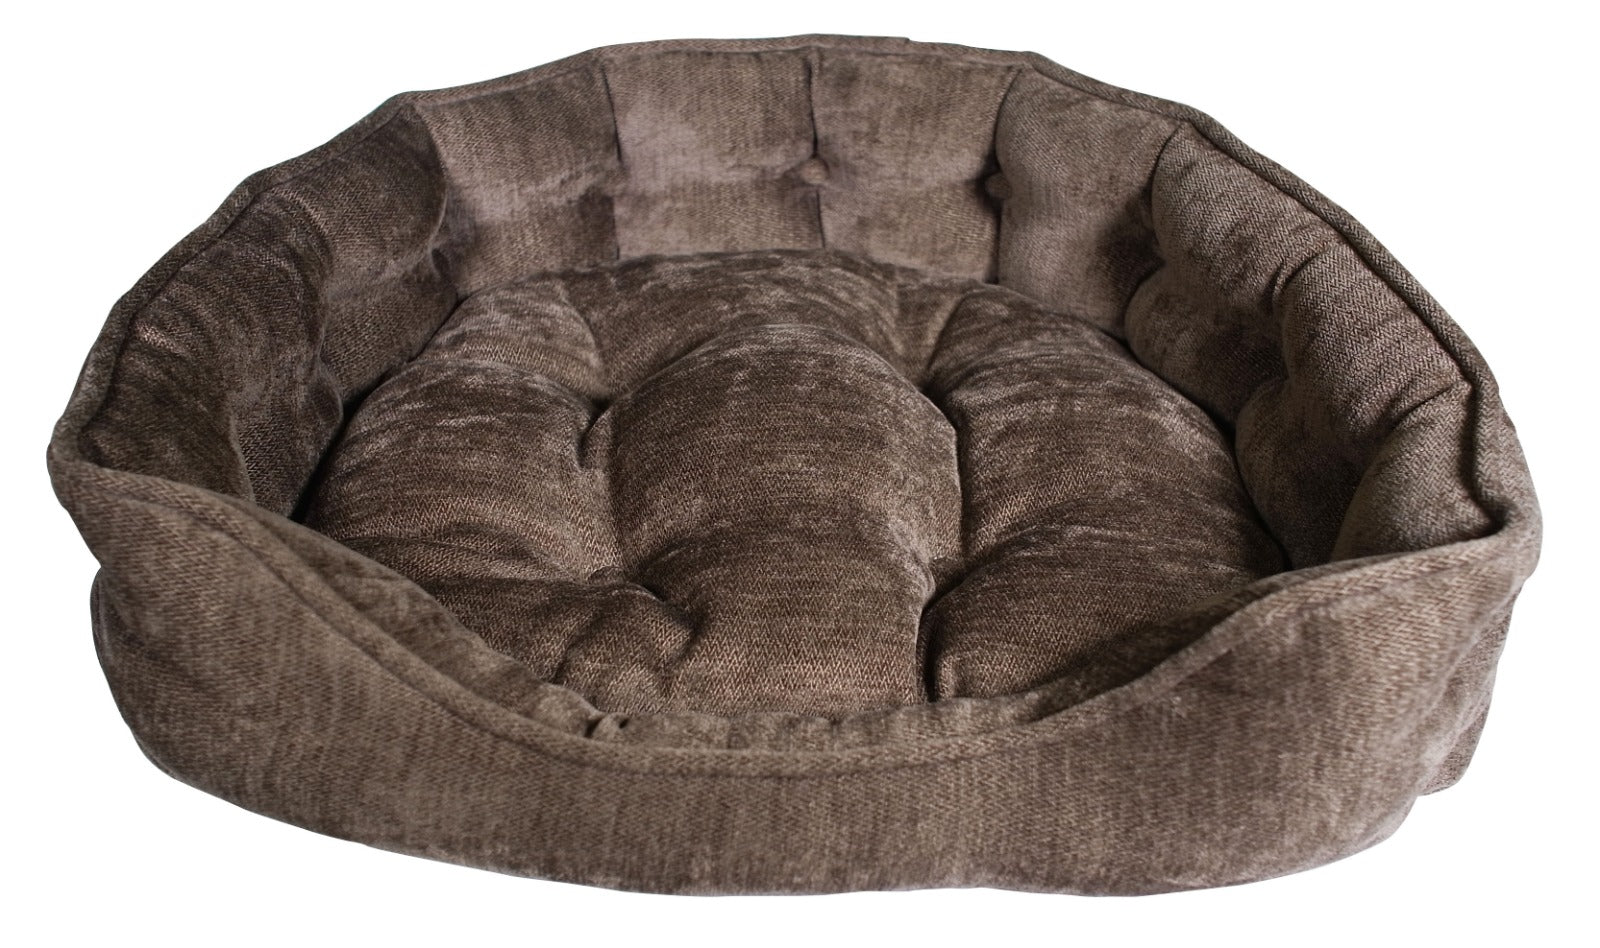 One for Pets - Pamola Snuggle Bed - Sandalwood - 25" x 21" x 6" (L)